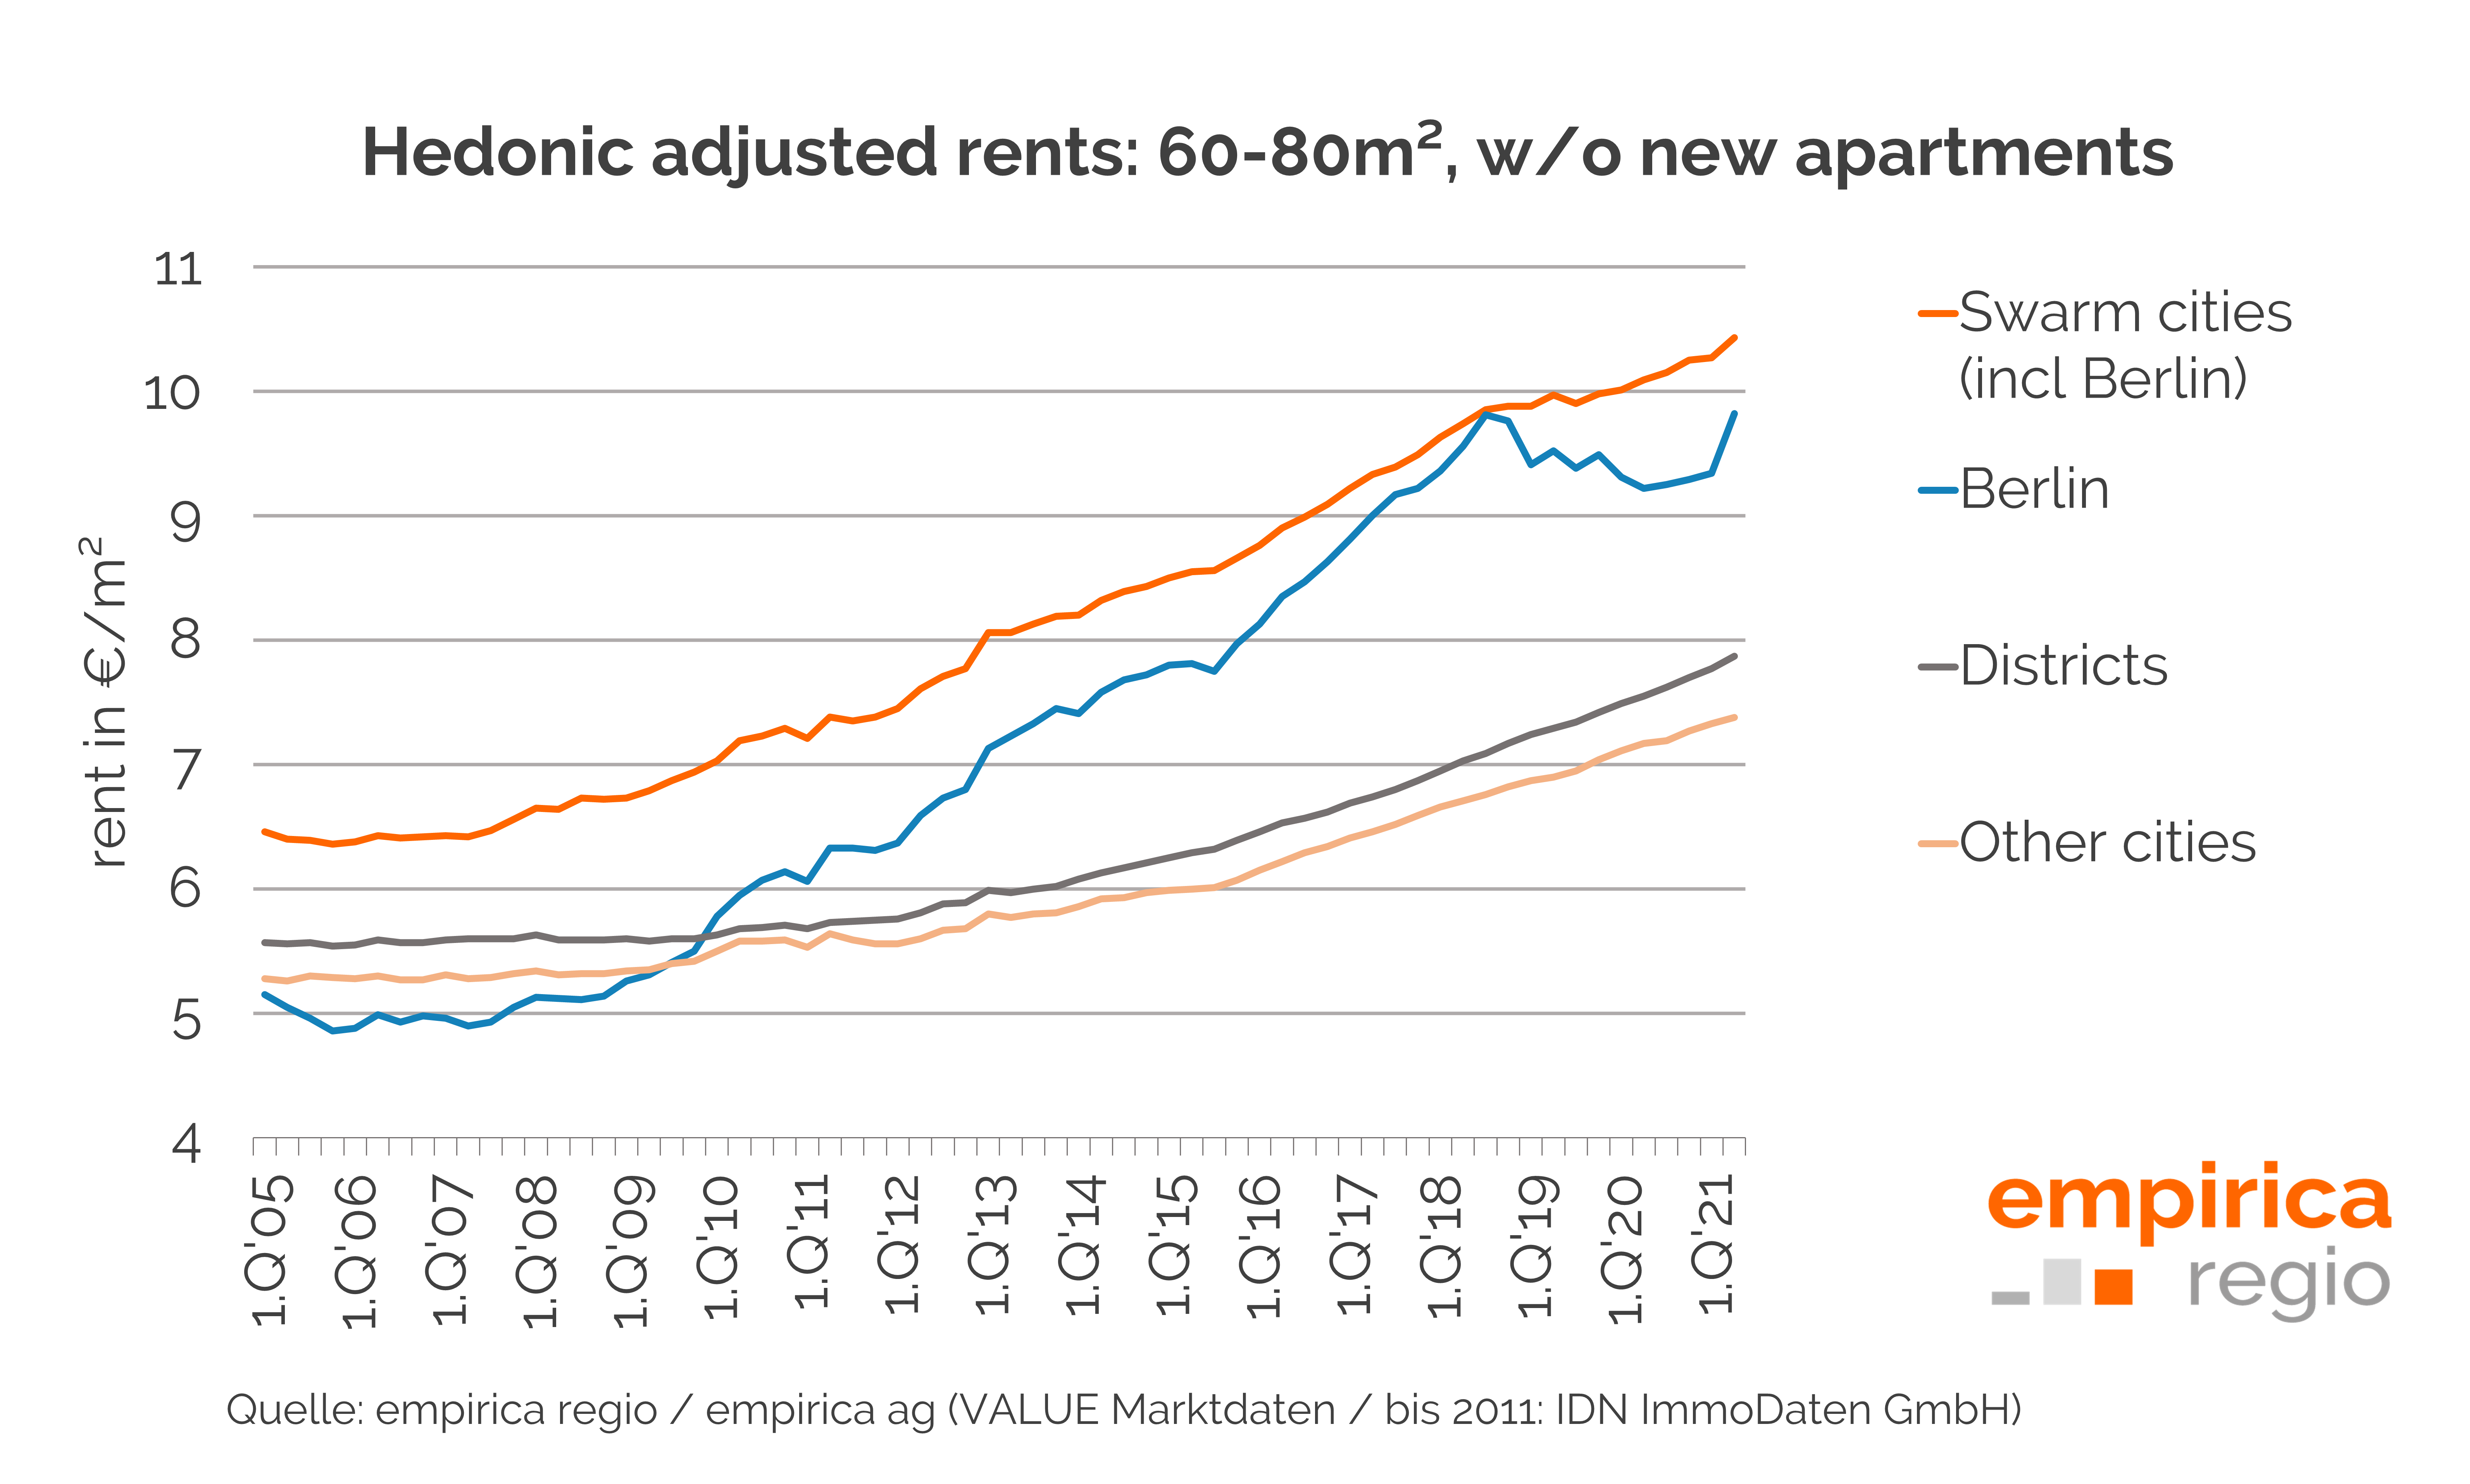 Hedonic rents in the stock for Berlin and swarm cities